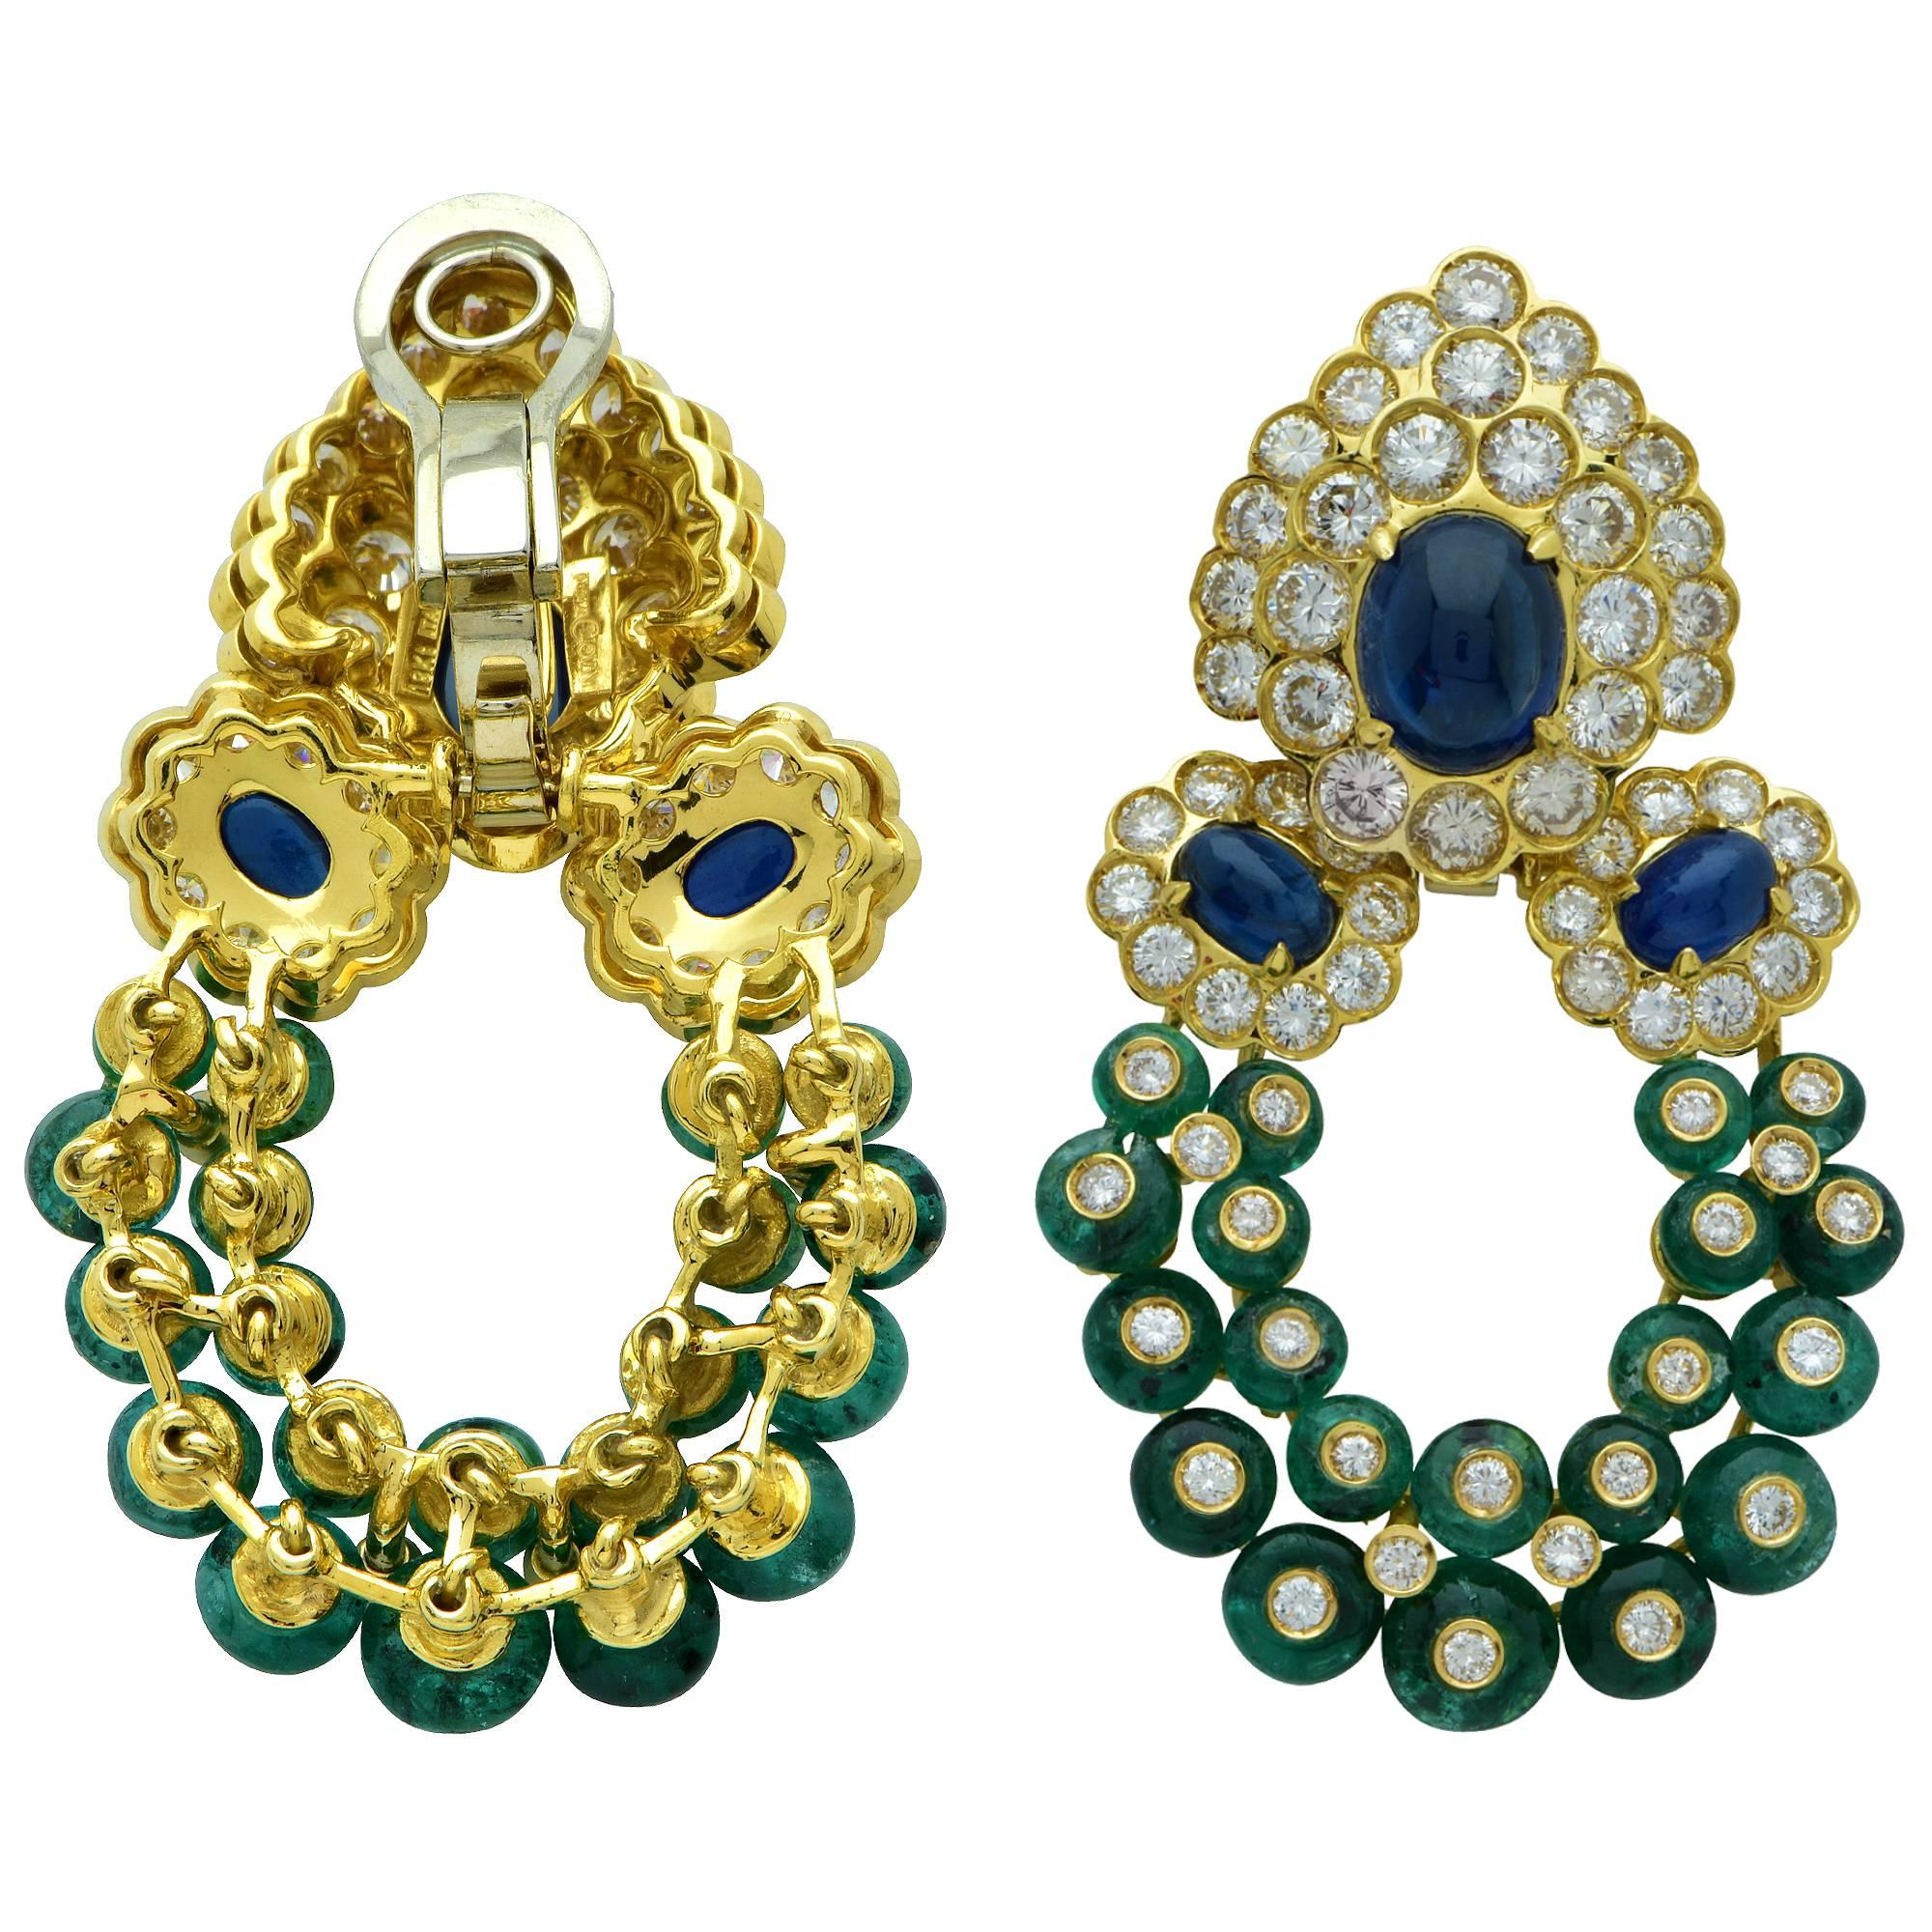 18k yellow gold dangle earrings signed Giovane featuring approximately 6.80cts of round brilliant cut diamonds G color VS clarity accented by sapphire cabochons and emeralds. The bottoms are removable and the earrings can be worn as